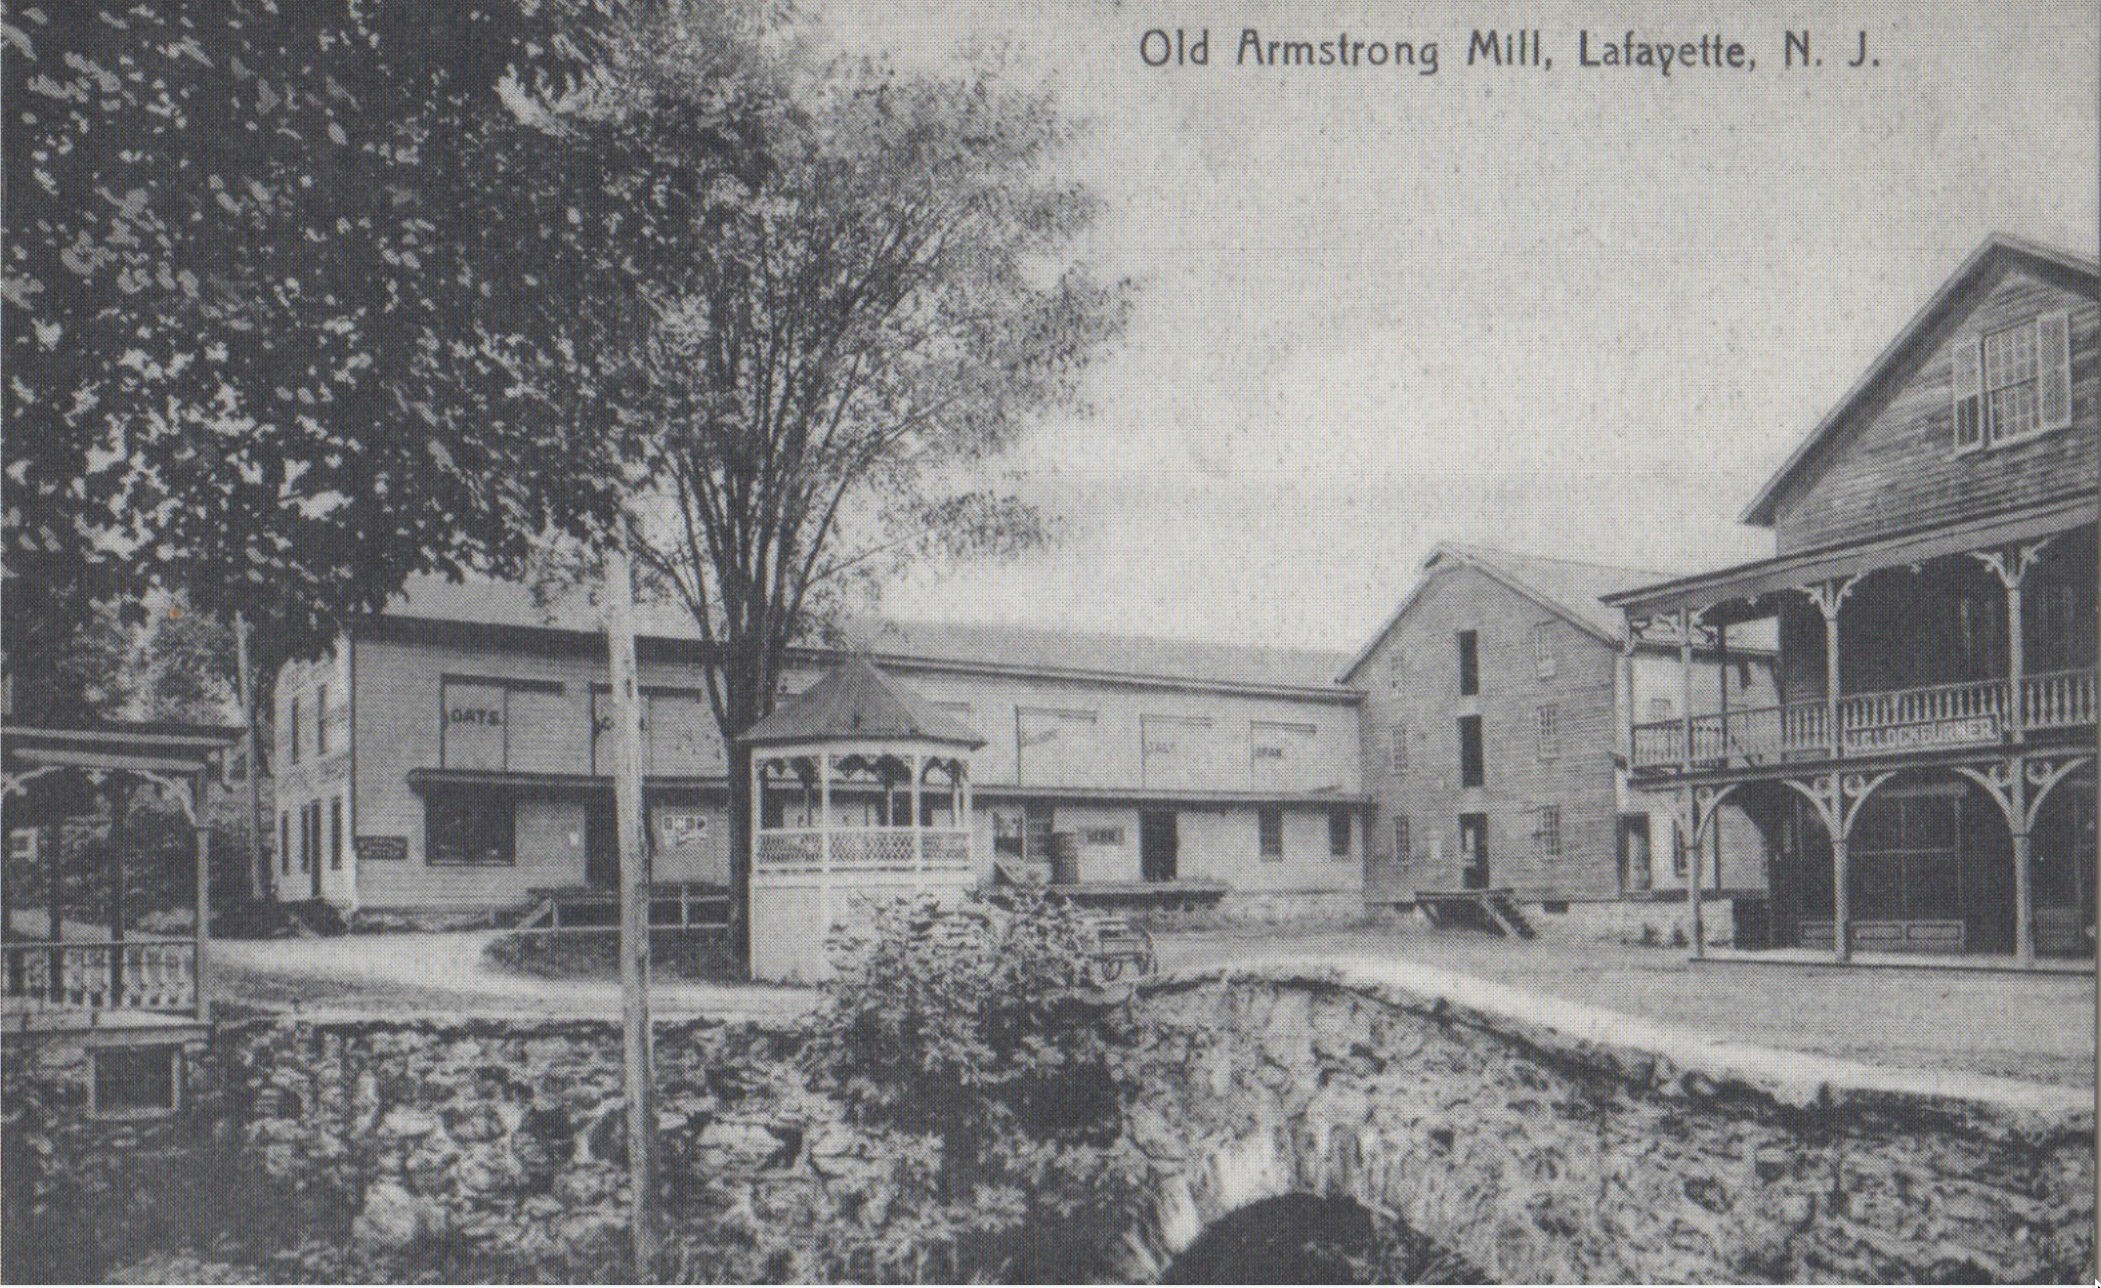 Lafayette - The Old Armstrong Mill - c 1910